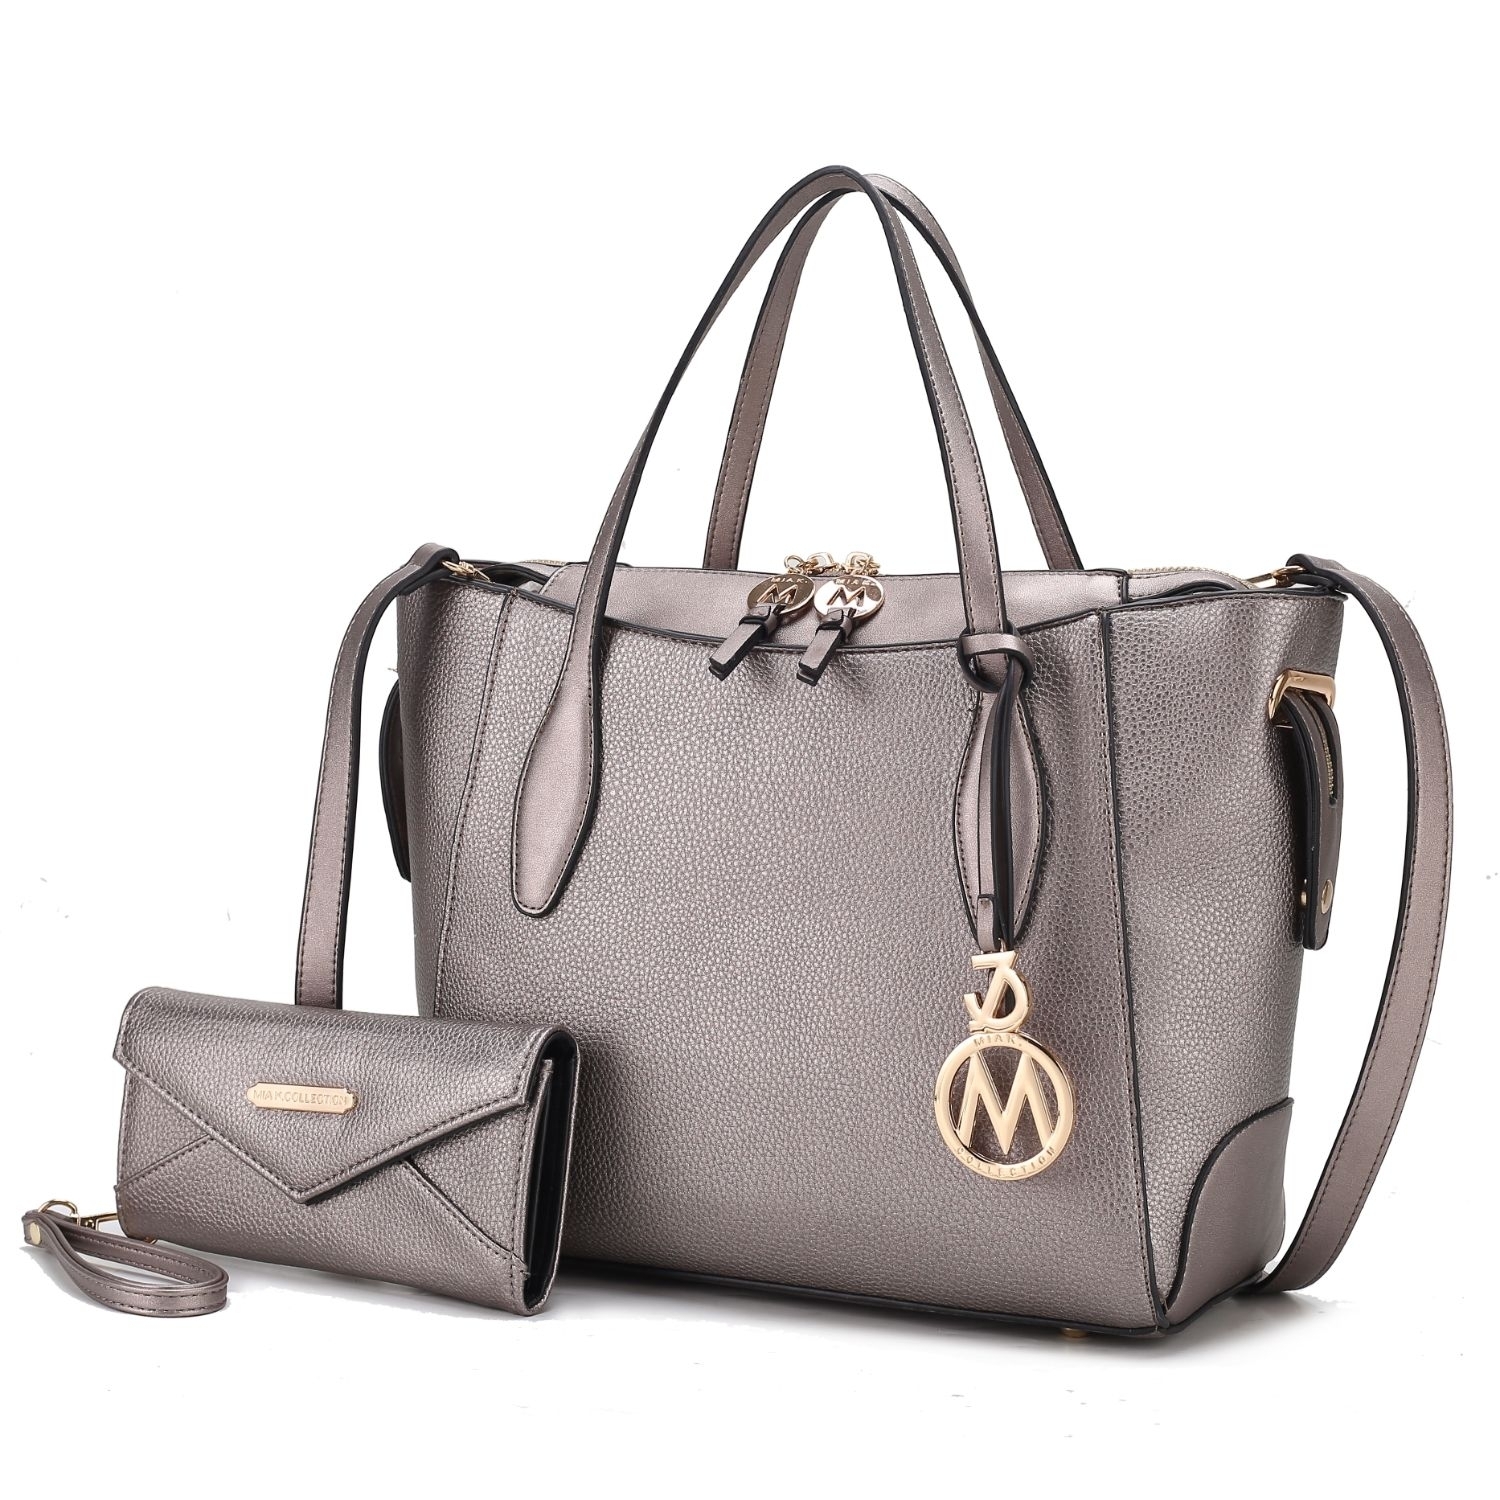 MKF Collection Bruna Vegan Leather Women's Tote Bag With Wallet -2 Pieces By Mia K - Pewter